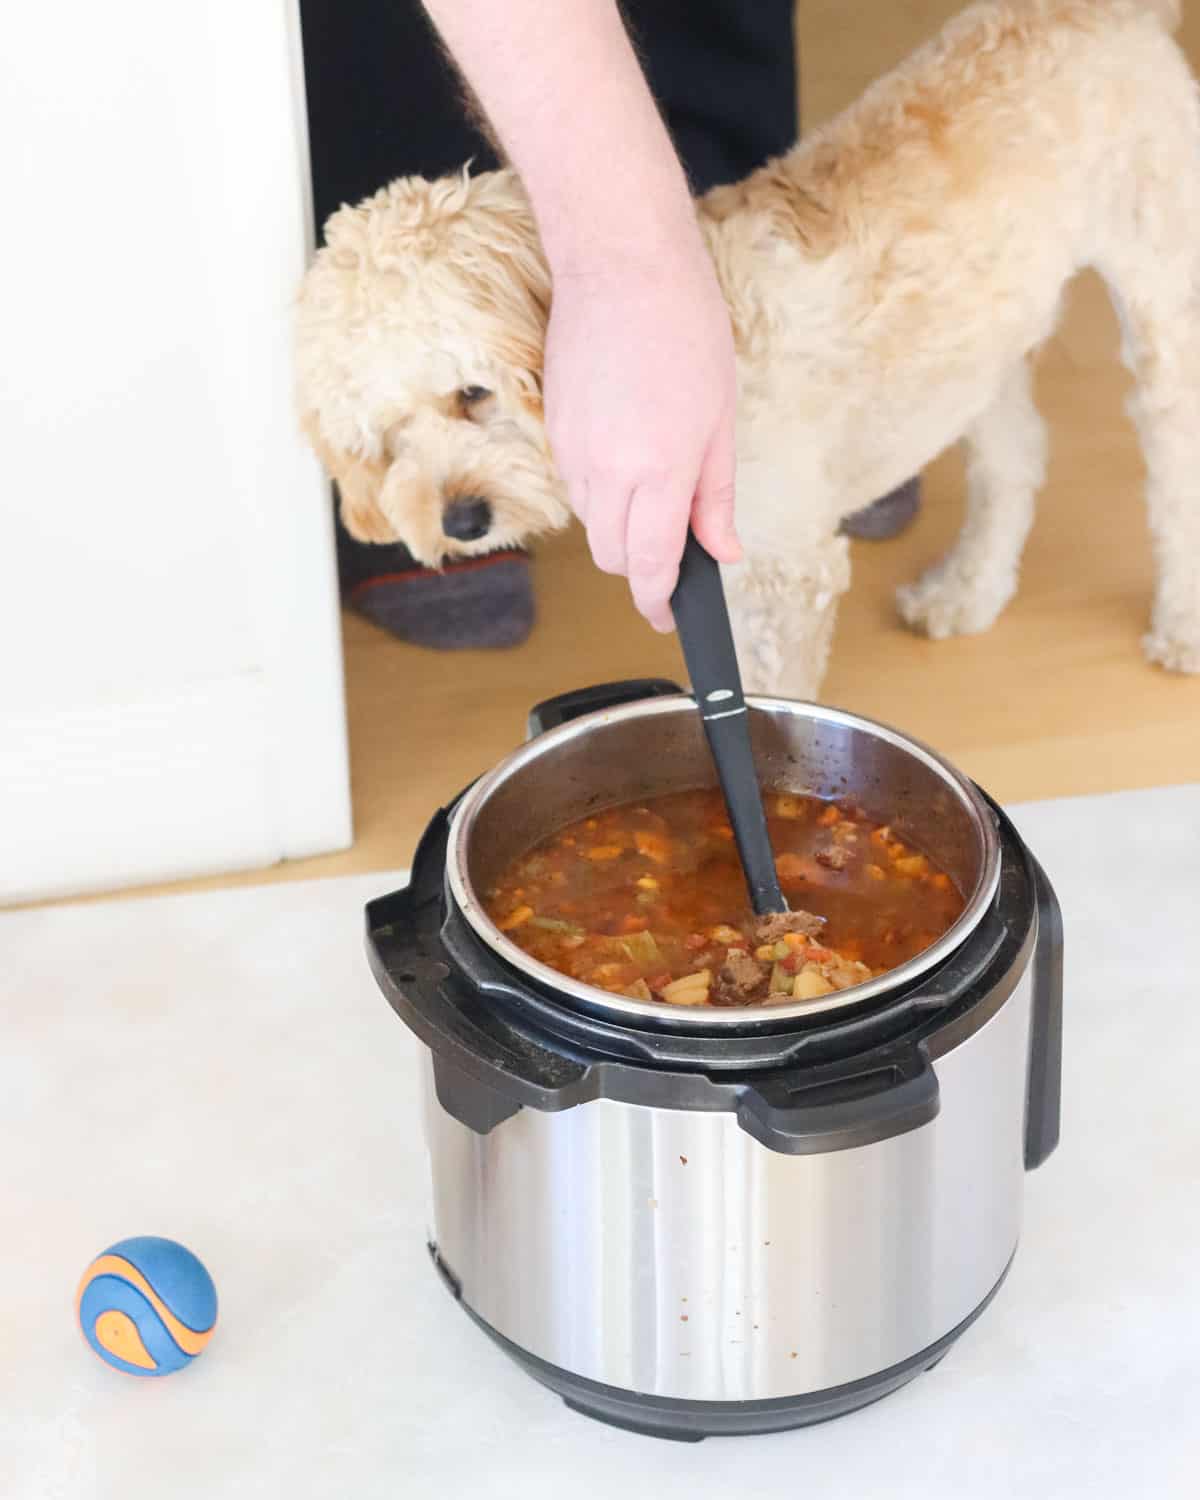 a blue and orange ball with a dog being held back by a man holding a spoon in an instant pot full of soup